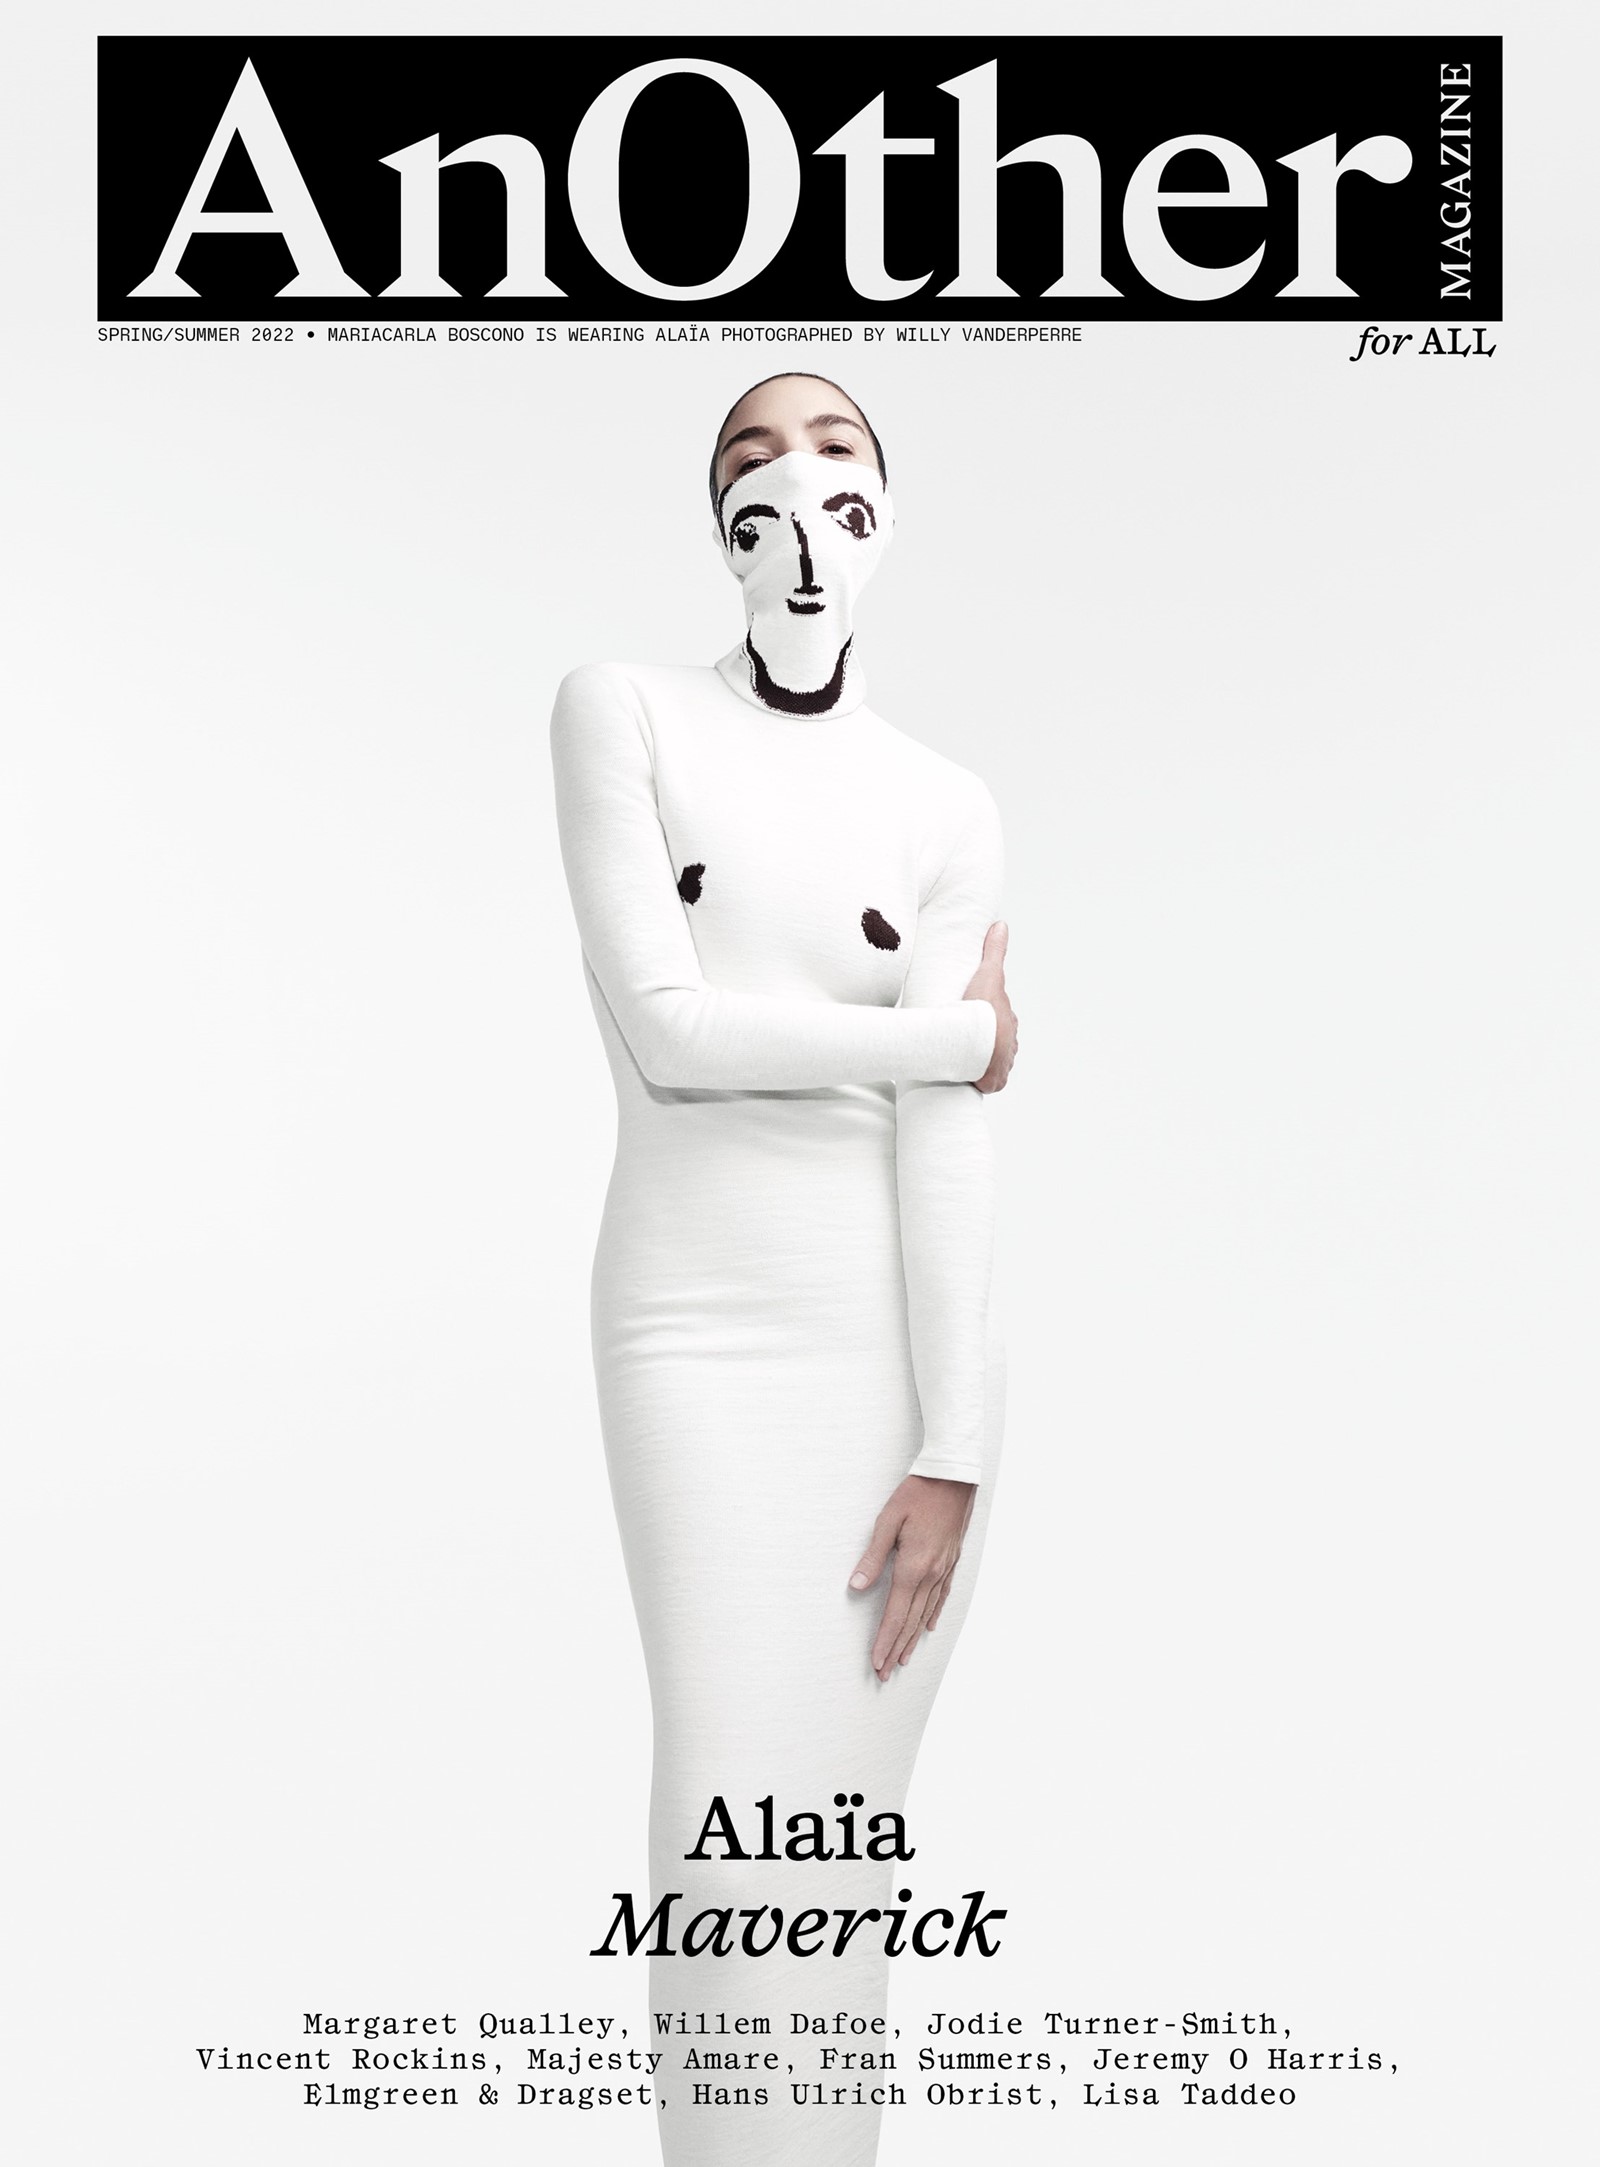 Pieter Mulier: Ala&#239;a for AnOther Magazine Spring/Summer 2022